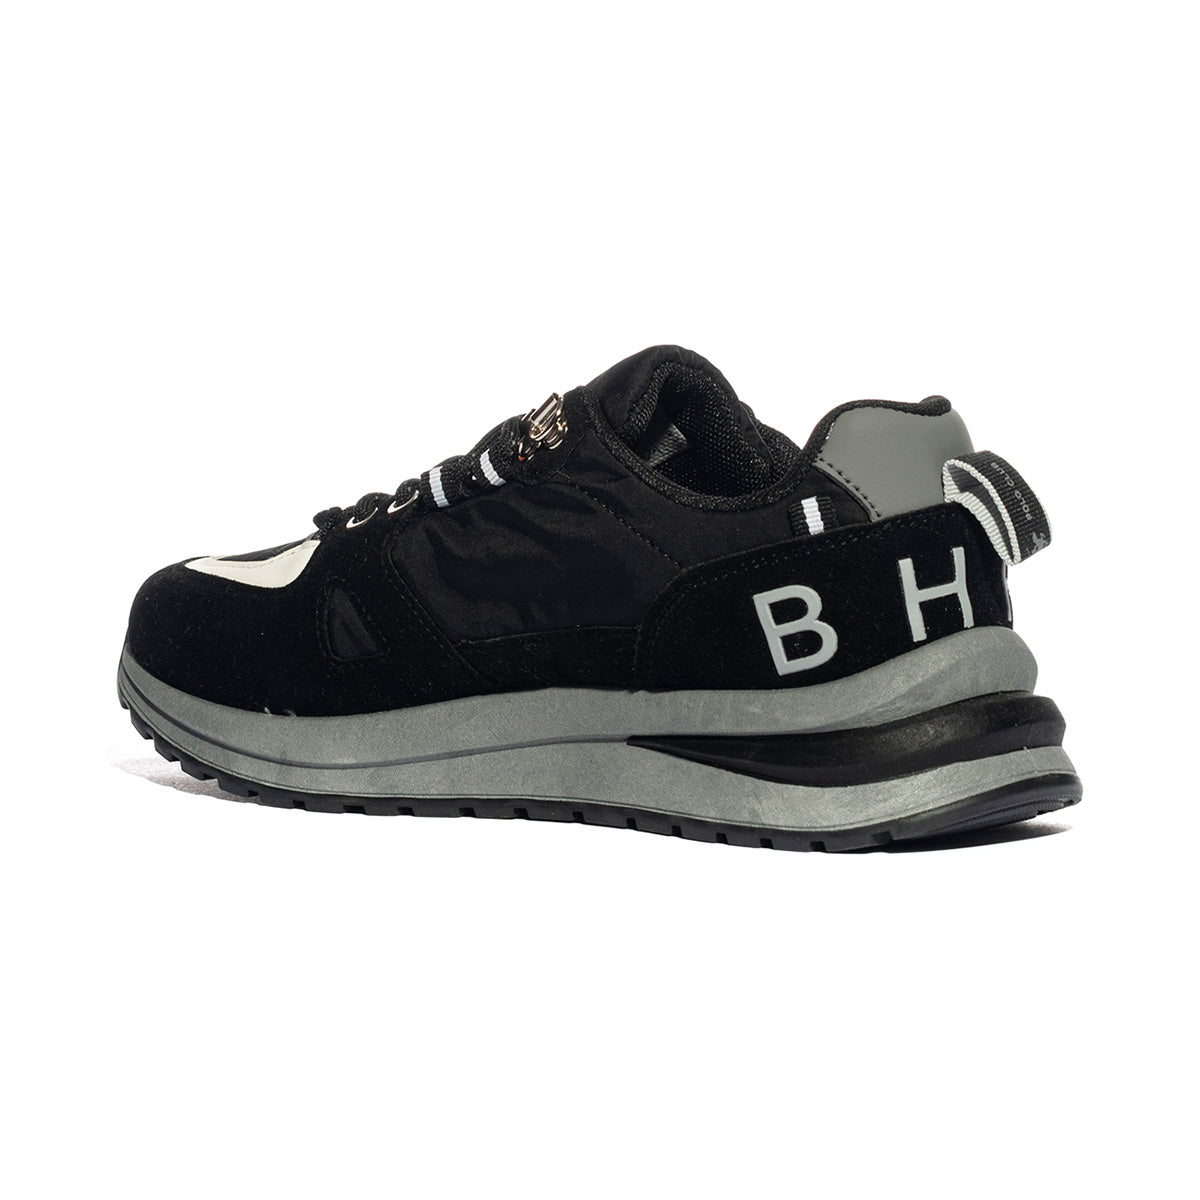 Sneakers Beverly Hills Polo Club Hm8795 Nere